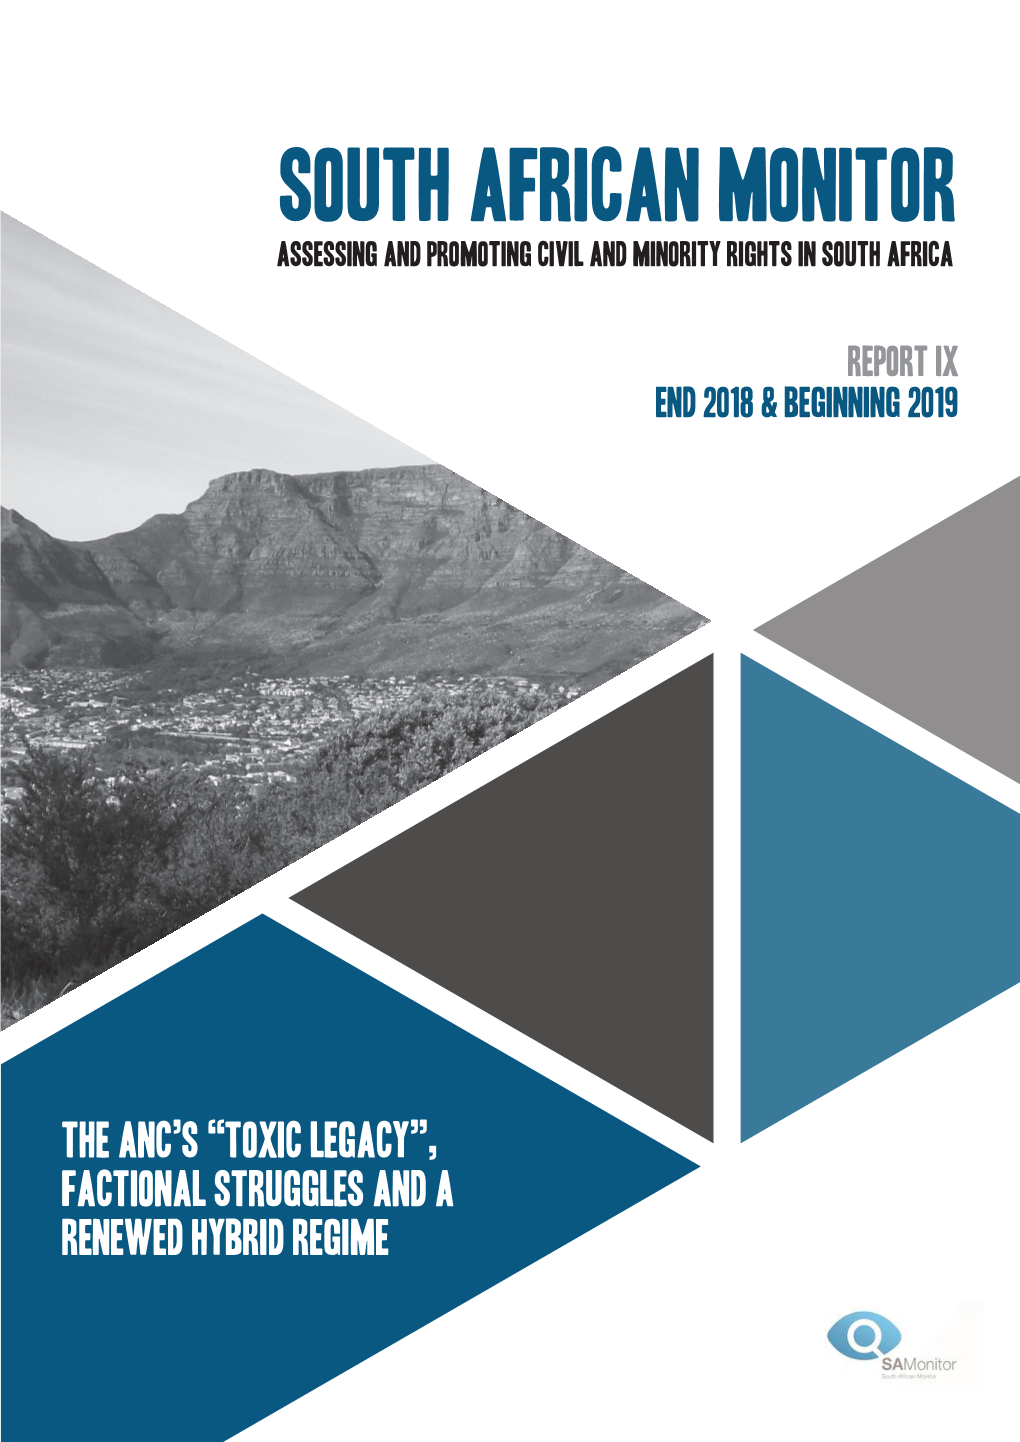 The South African Monitor Report of April 2019 Is Available Here